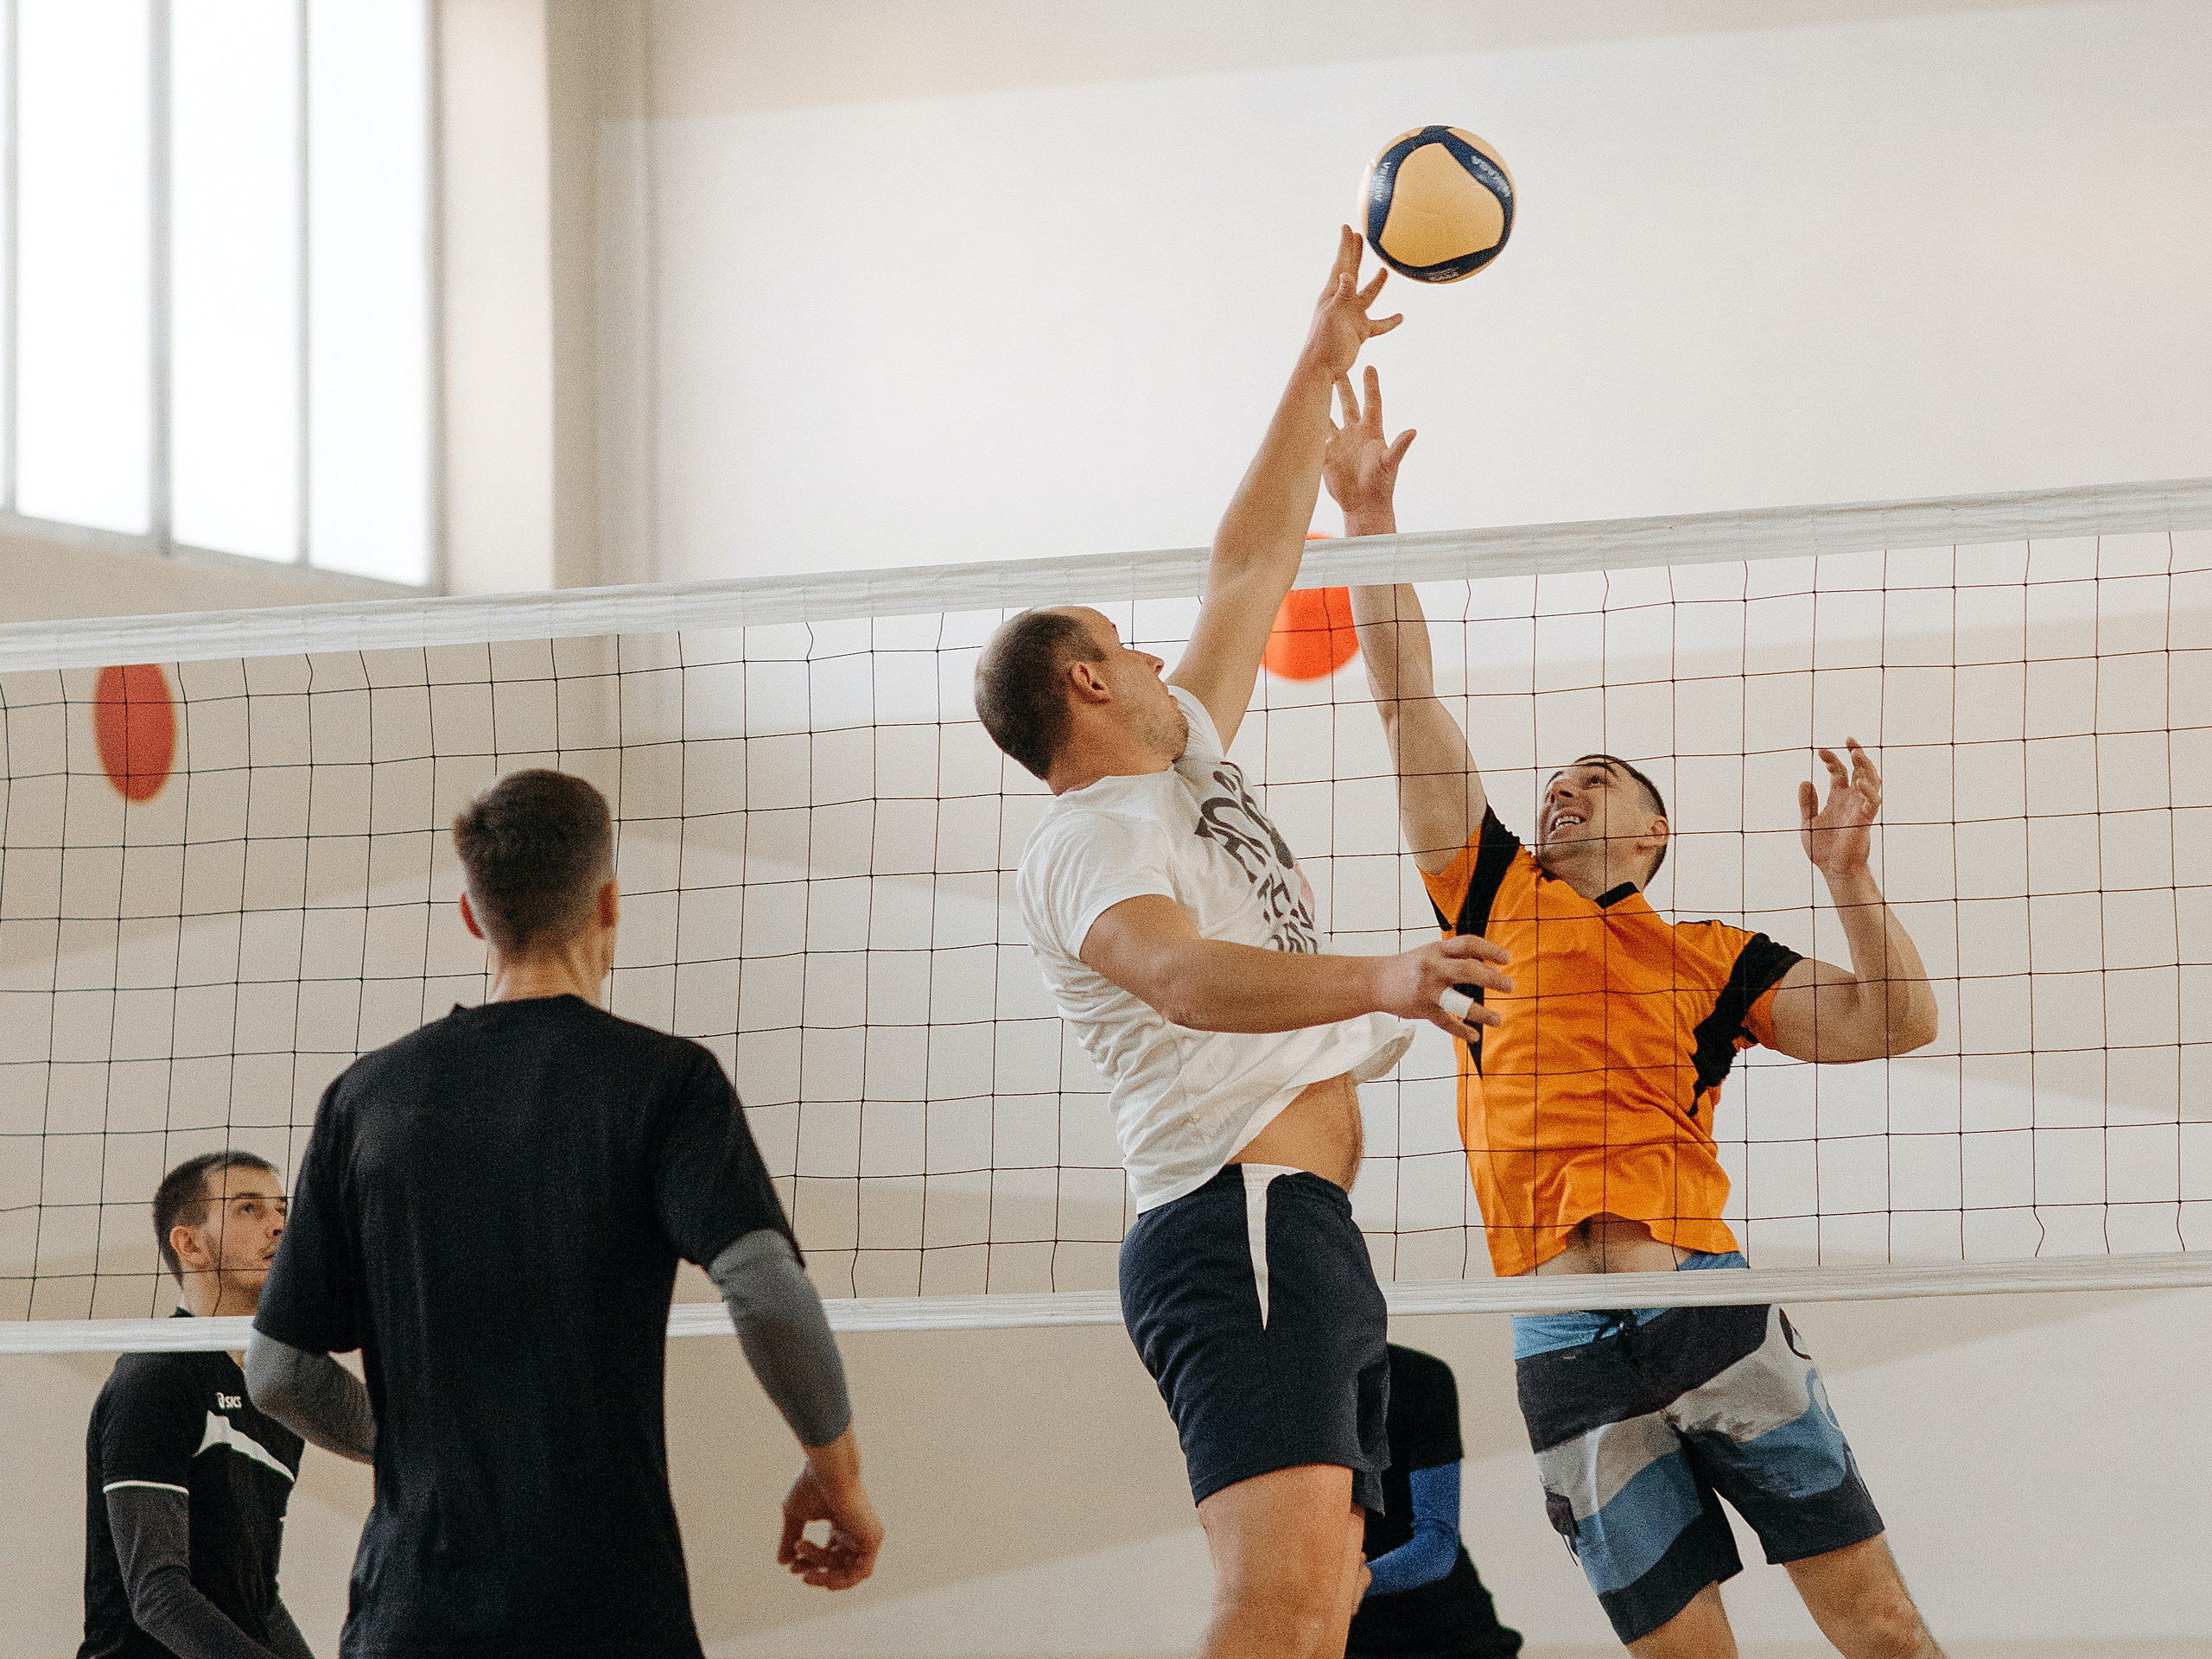 men playing volleyball. two of the men are jumping to attack the ball above the net.